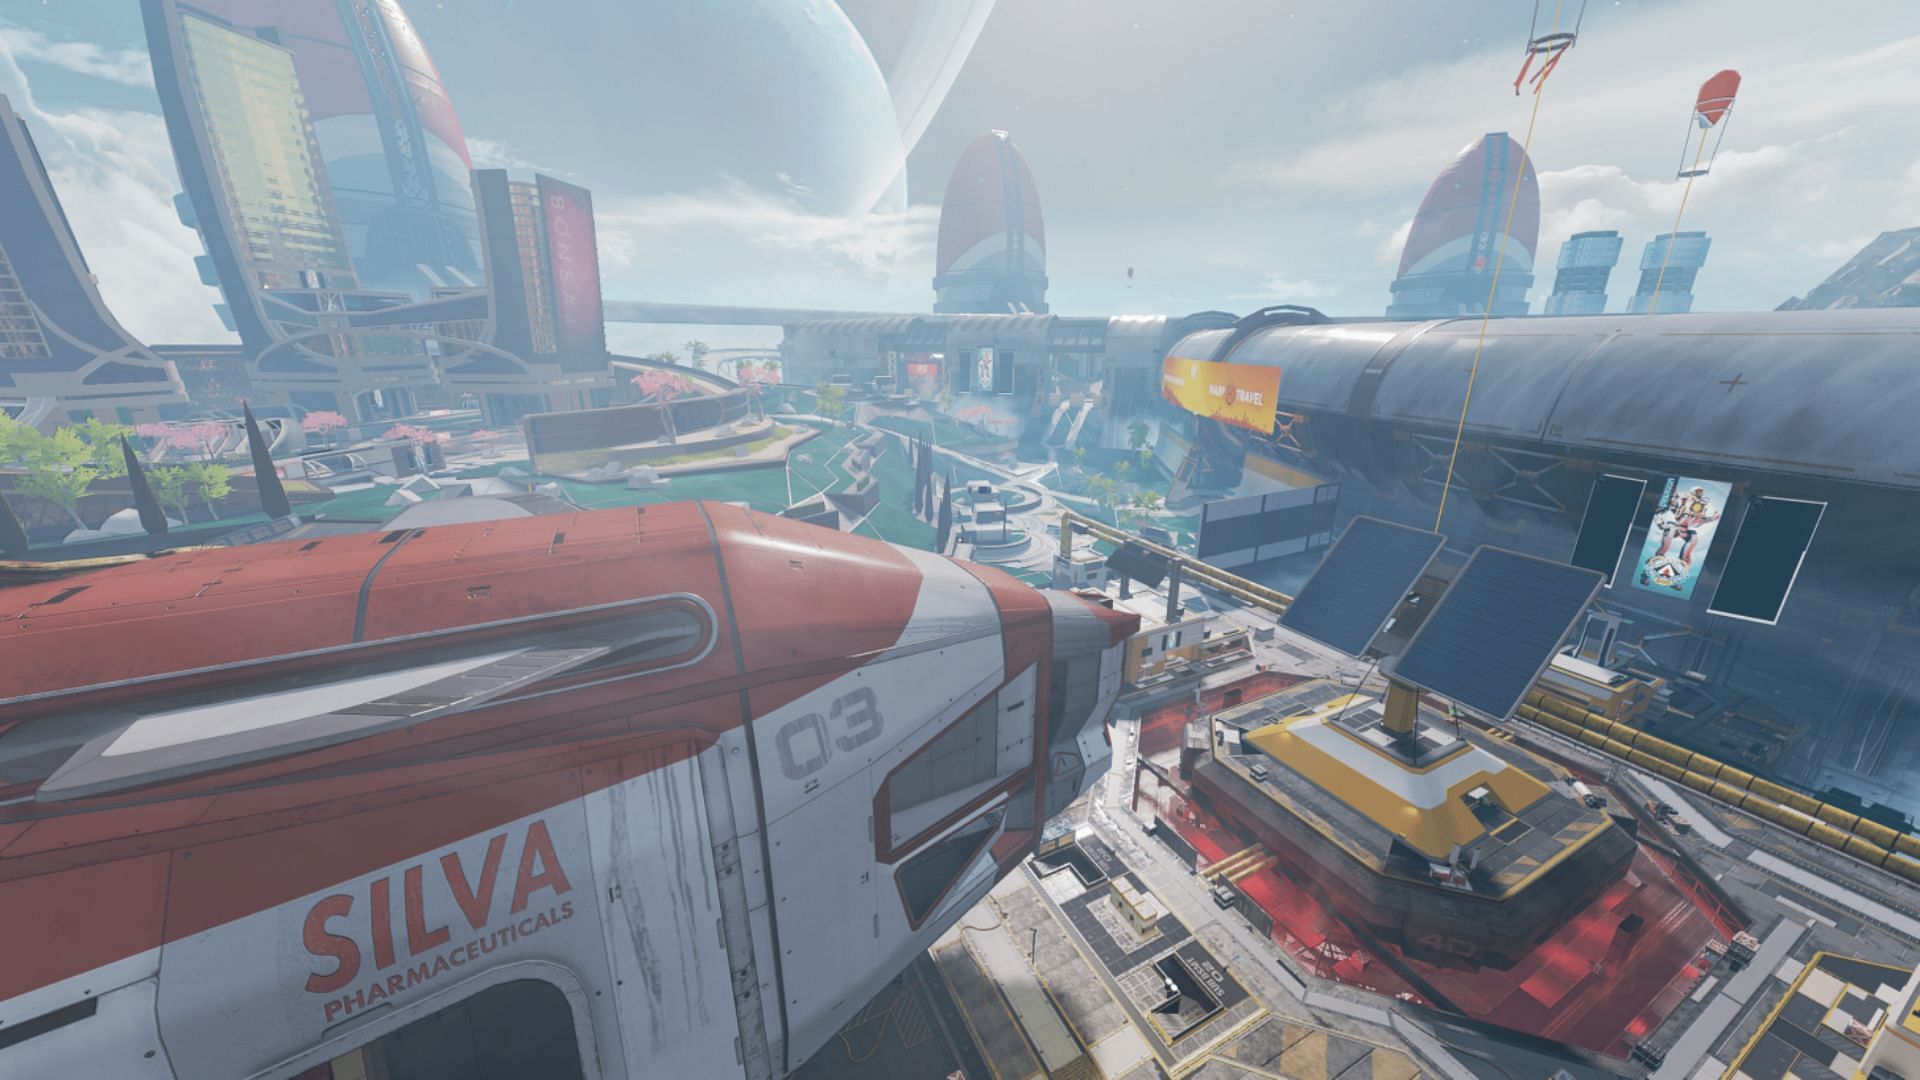 Orbital Cannon is no longer as isolated as it was before (Image by Respawn)